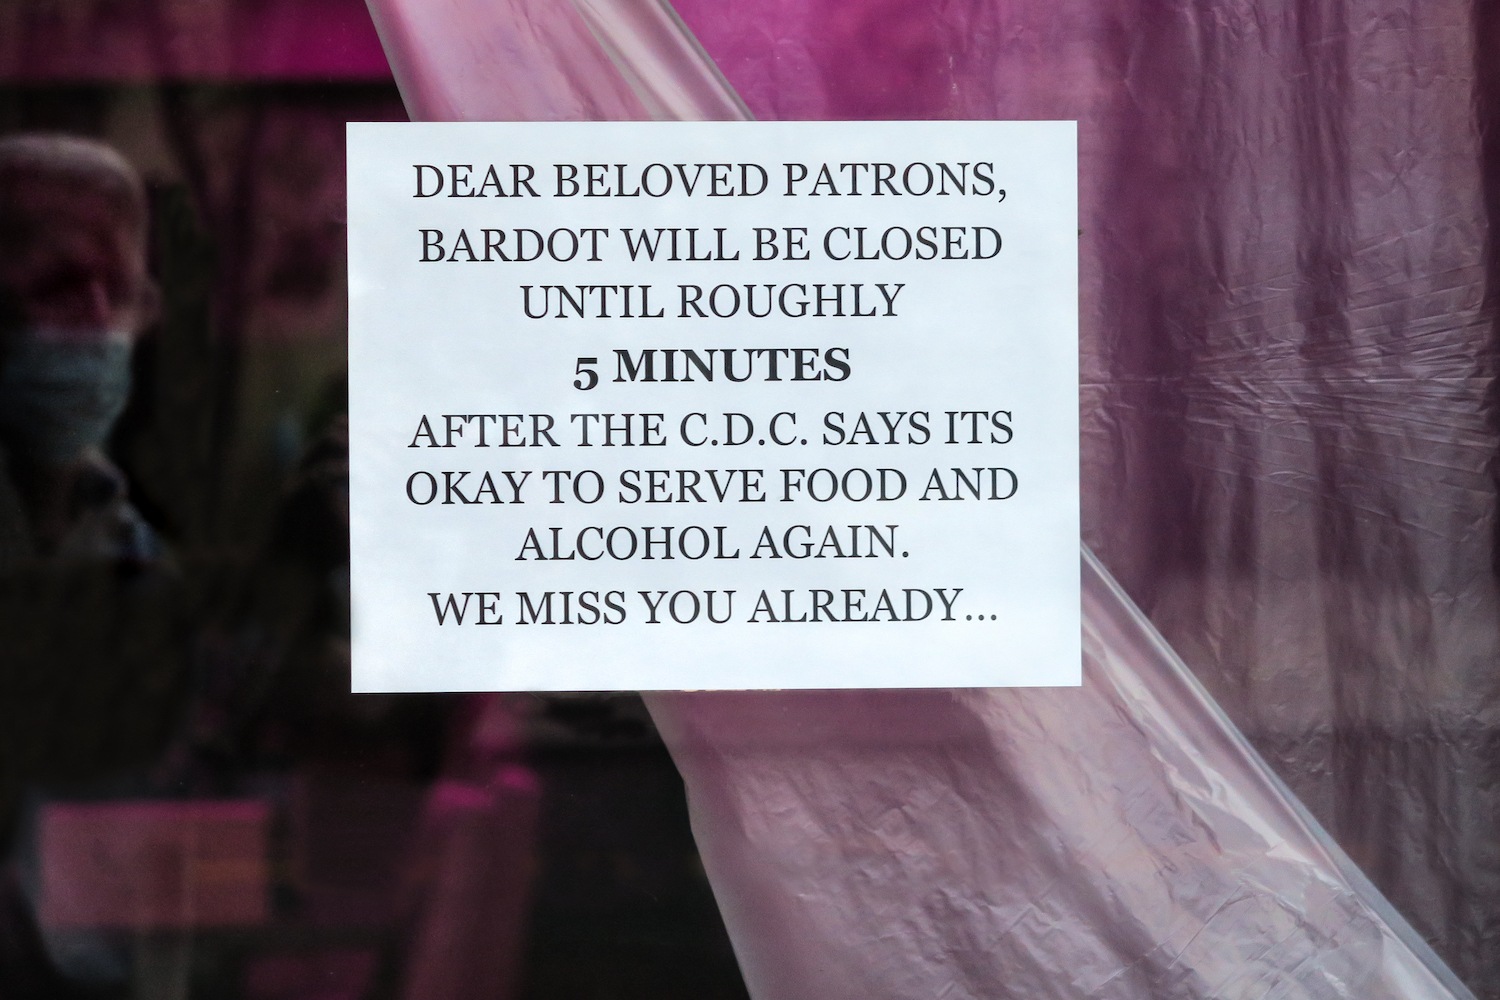 CDC advisory restaurant sign when to reopen May 2020